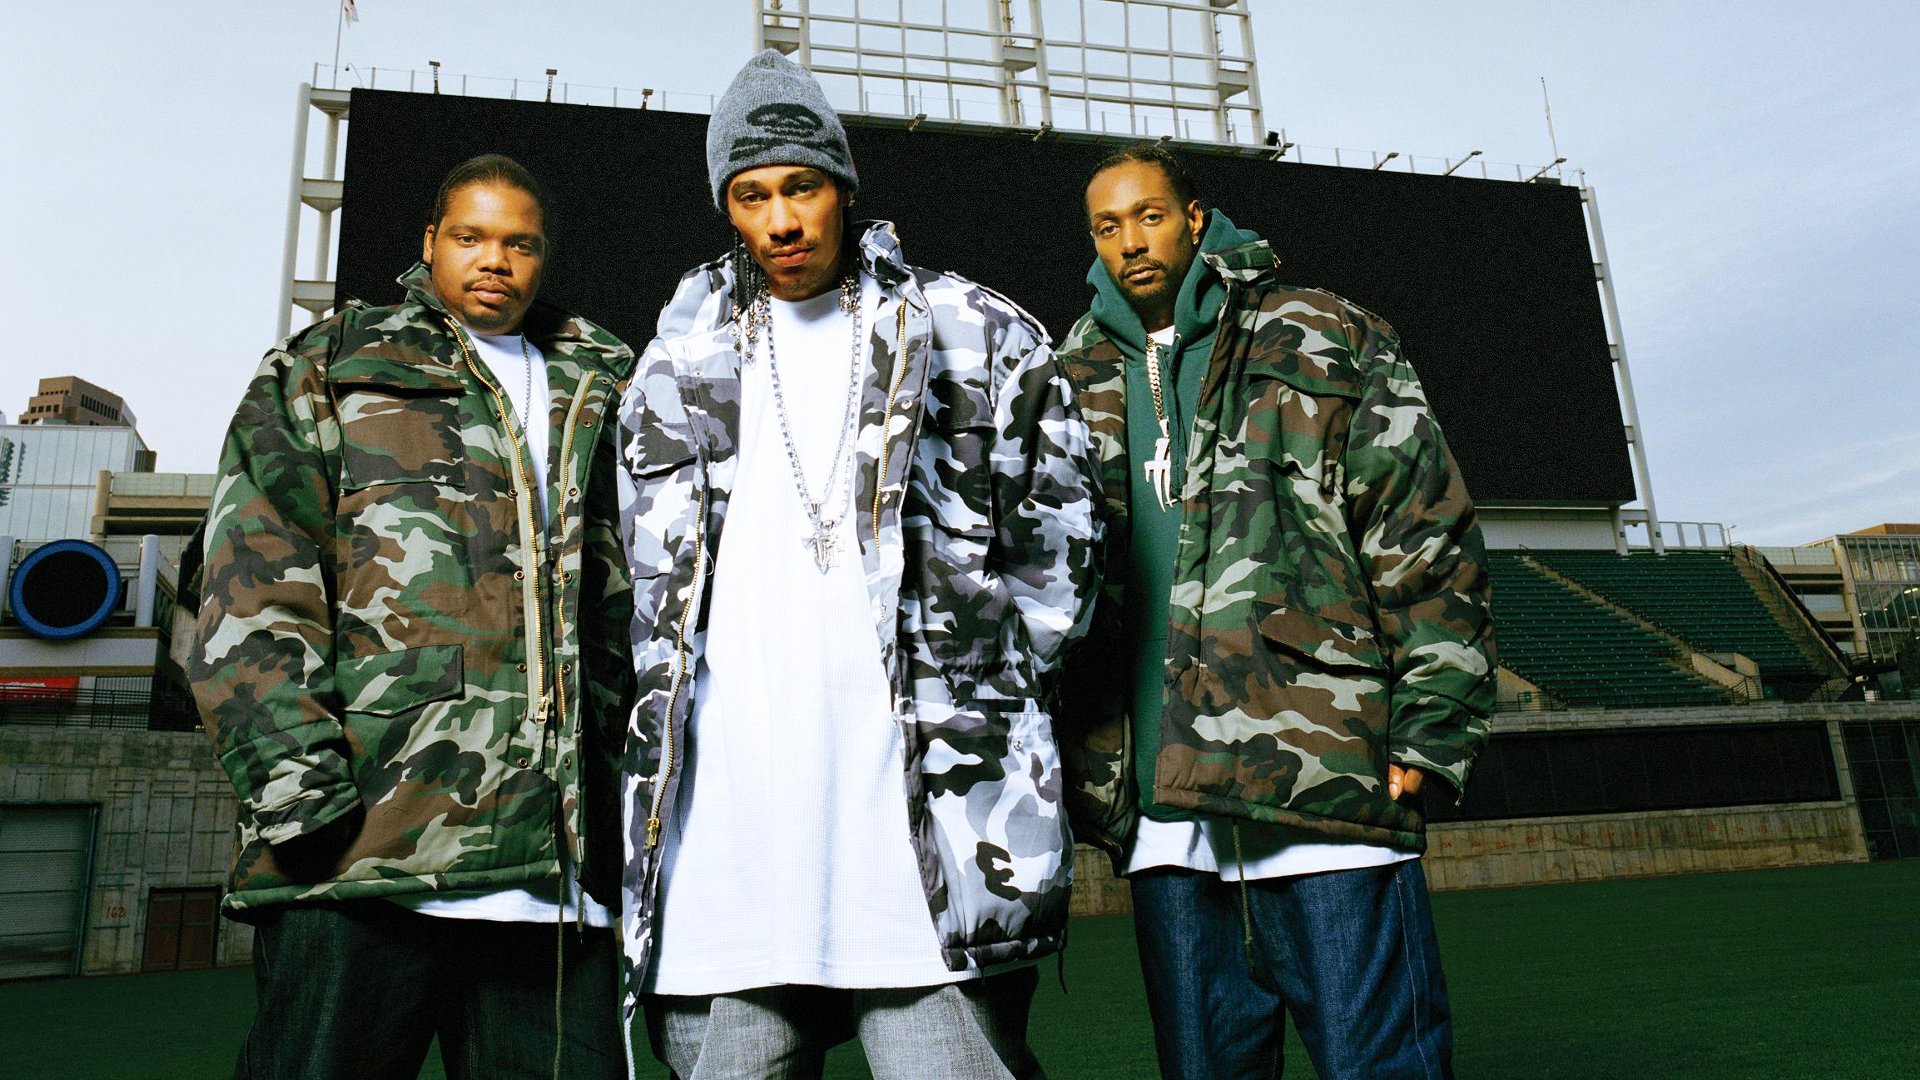 bone thugs n harmony wallpaper,military camouflage,soldier,army,military uniform,military